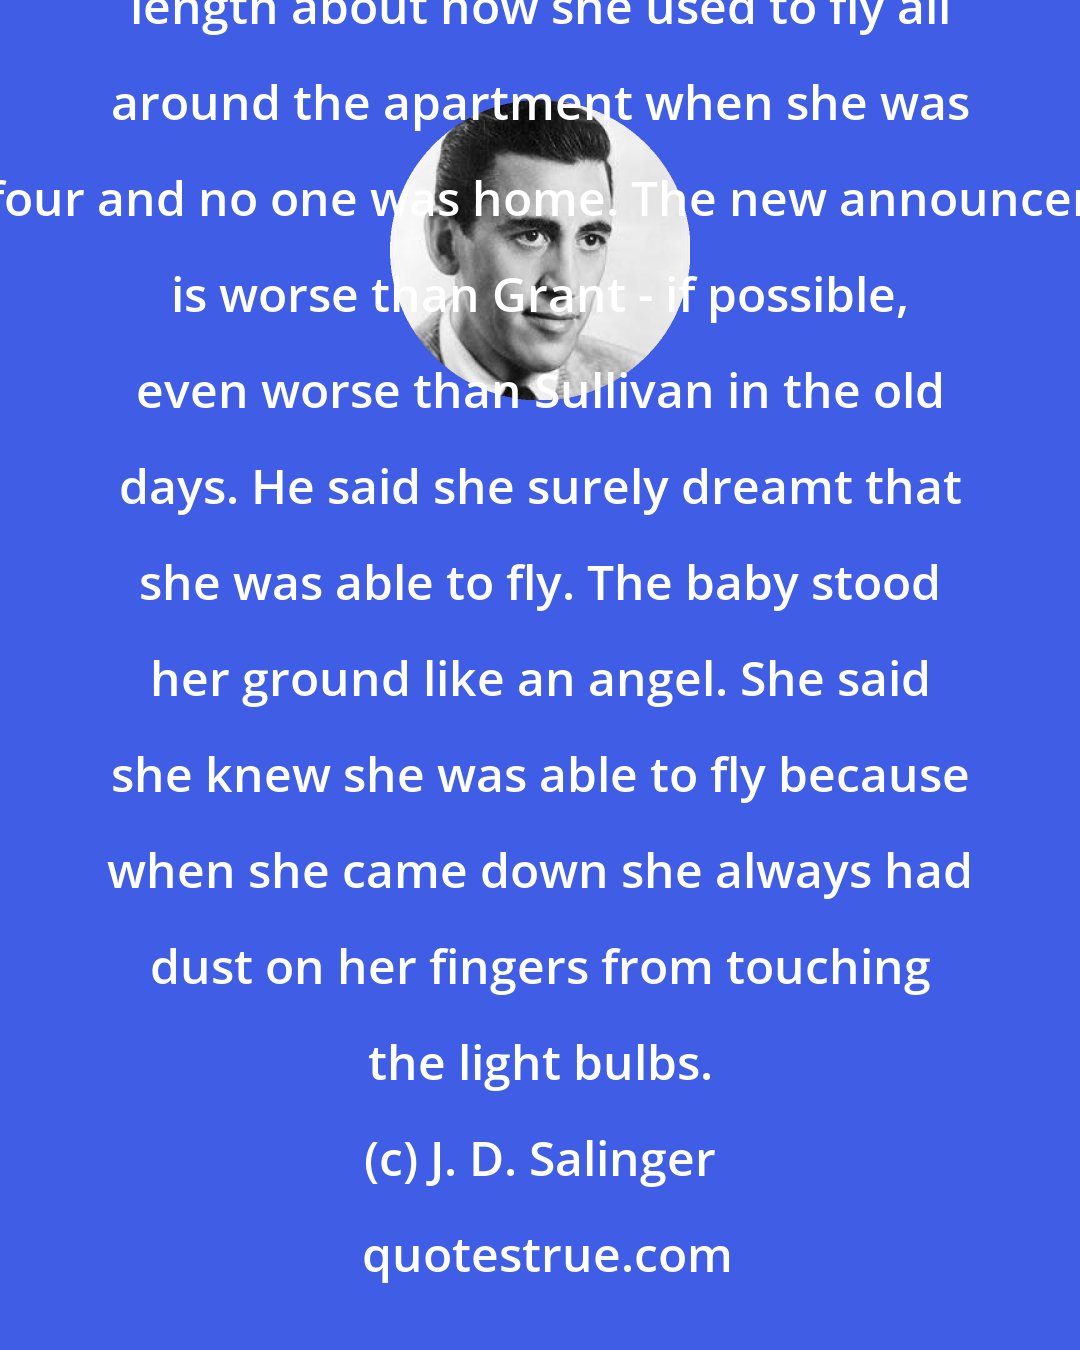 J. D. Salinger: Franny has the measles, for one thing. Incidentally, did you hear her last week? She went on at beautiful length about how she used to fly all around the apartment when she was four and no one was home. The new announcer is worse than Grant - if possible, even worse than Sullivan in the old days. He said she surely dreamt that she was able to fly. The baby stood her ground like an angel. She said she knew she was able to fly because when she came down she always had dust on her fingers from touching the light bulbs.